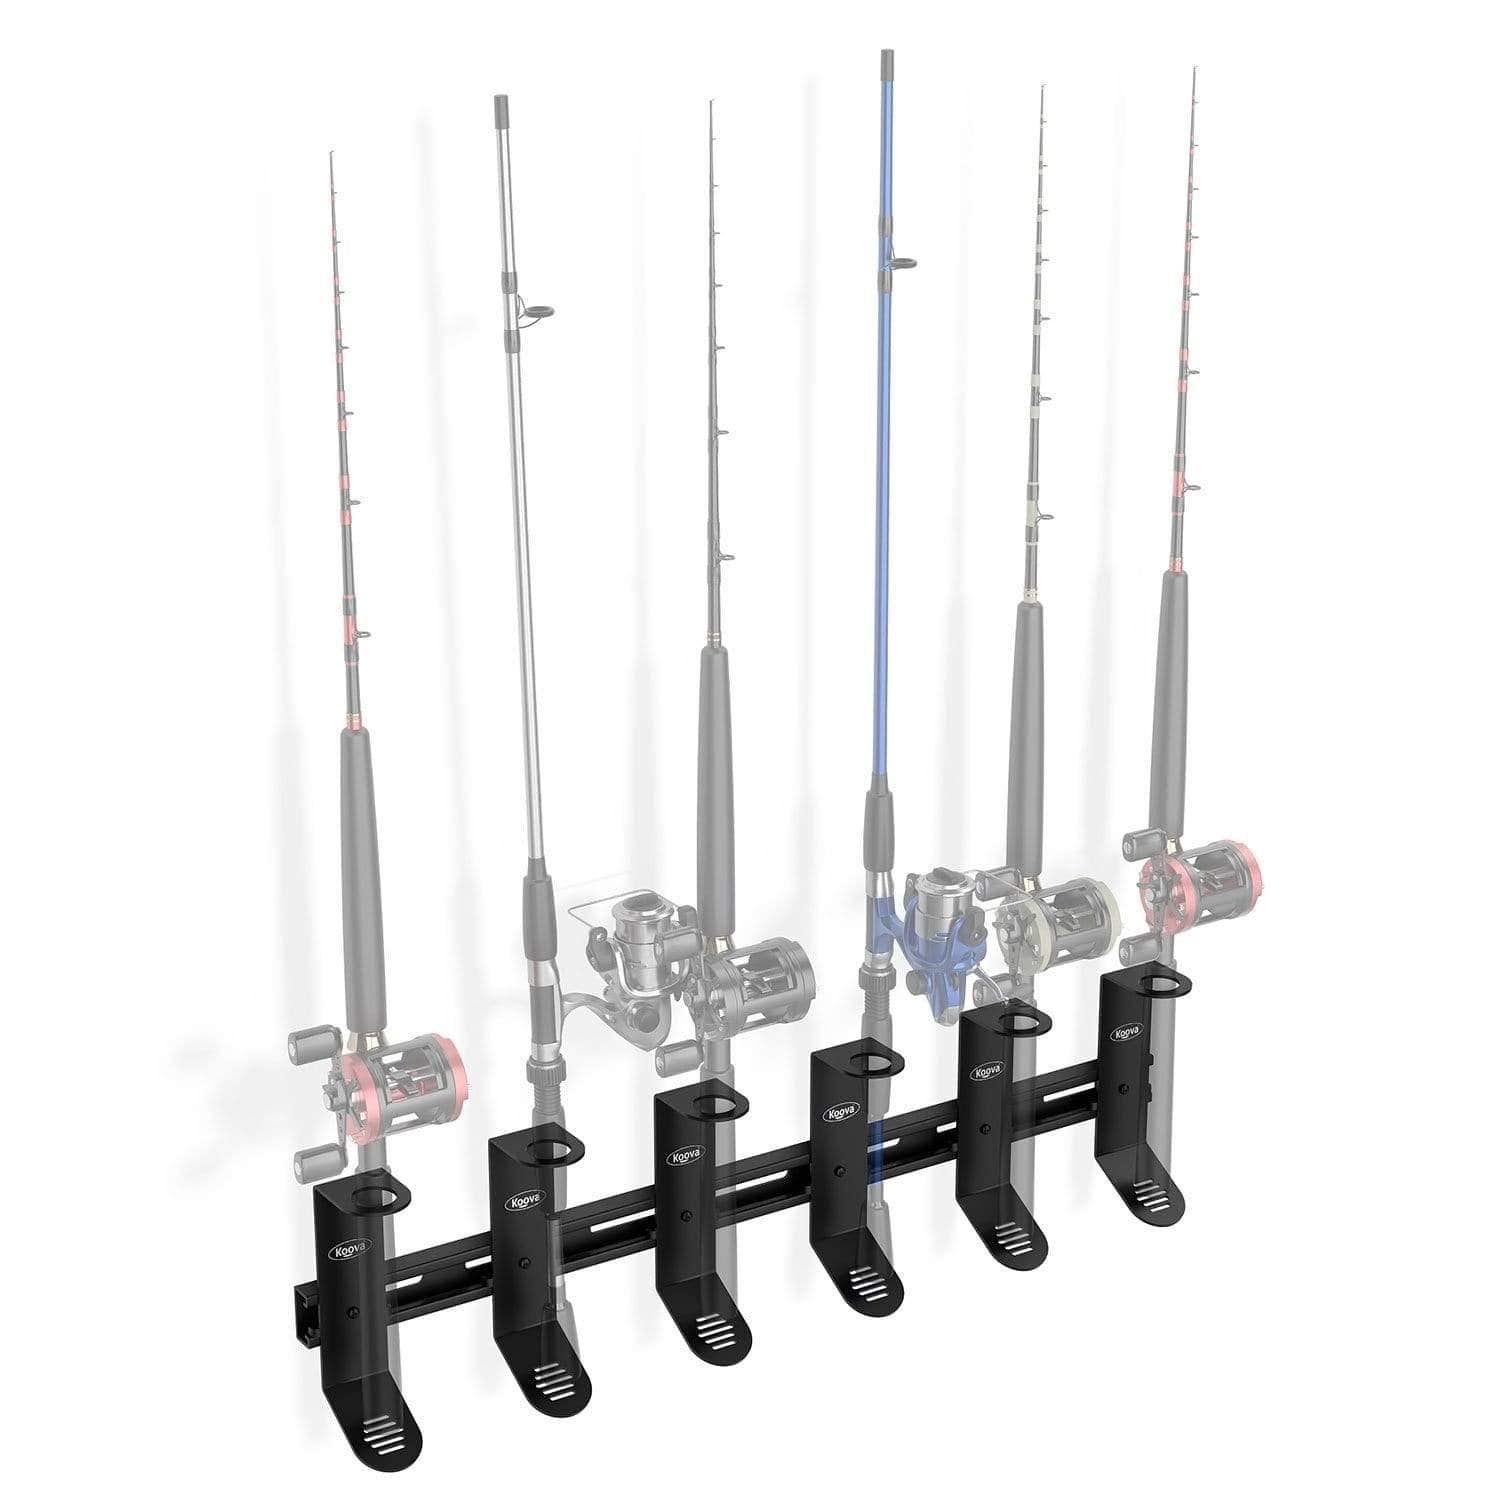 FISHING ROD STAND